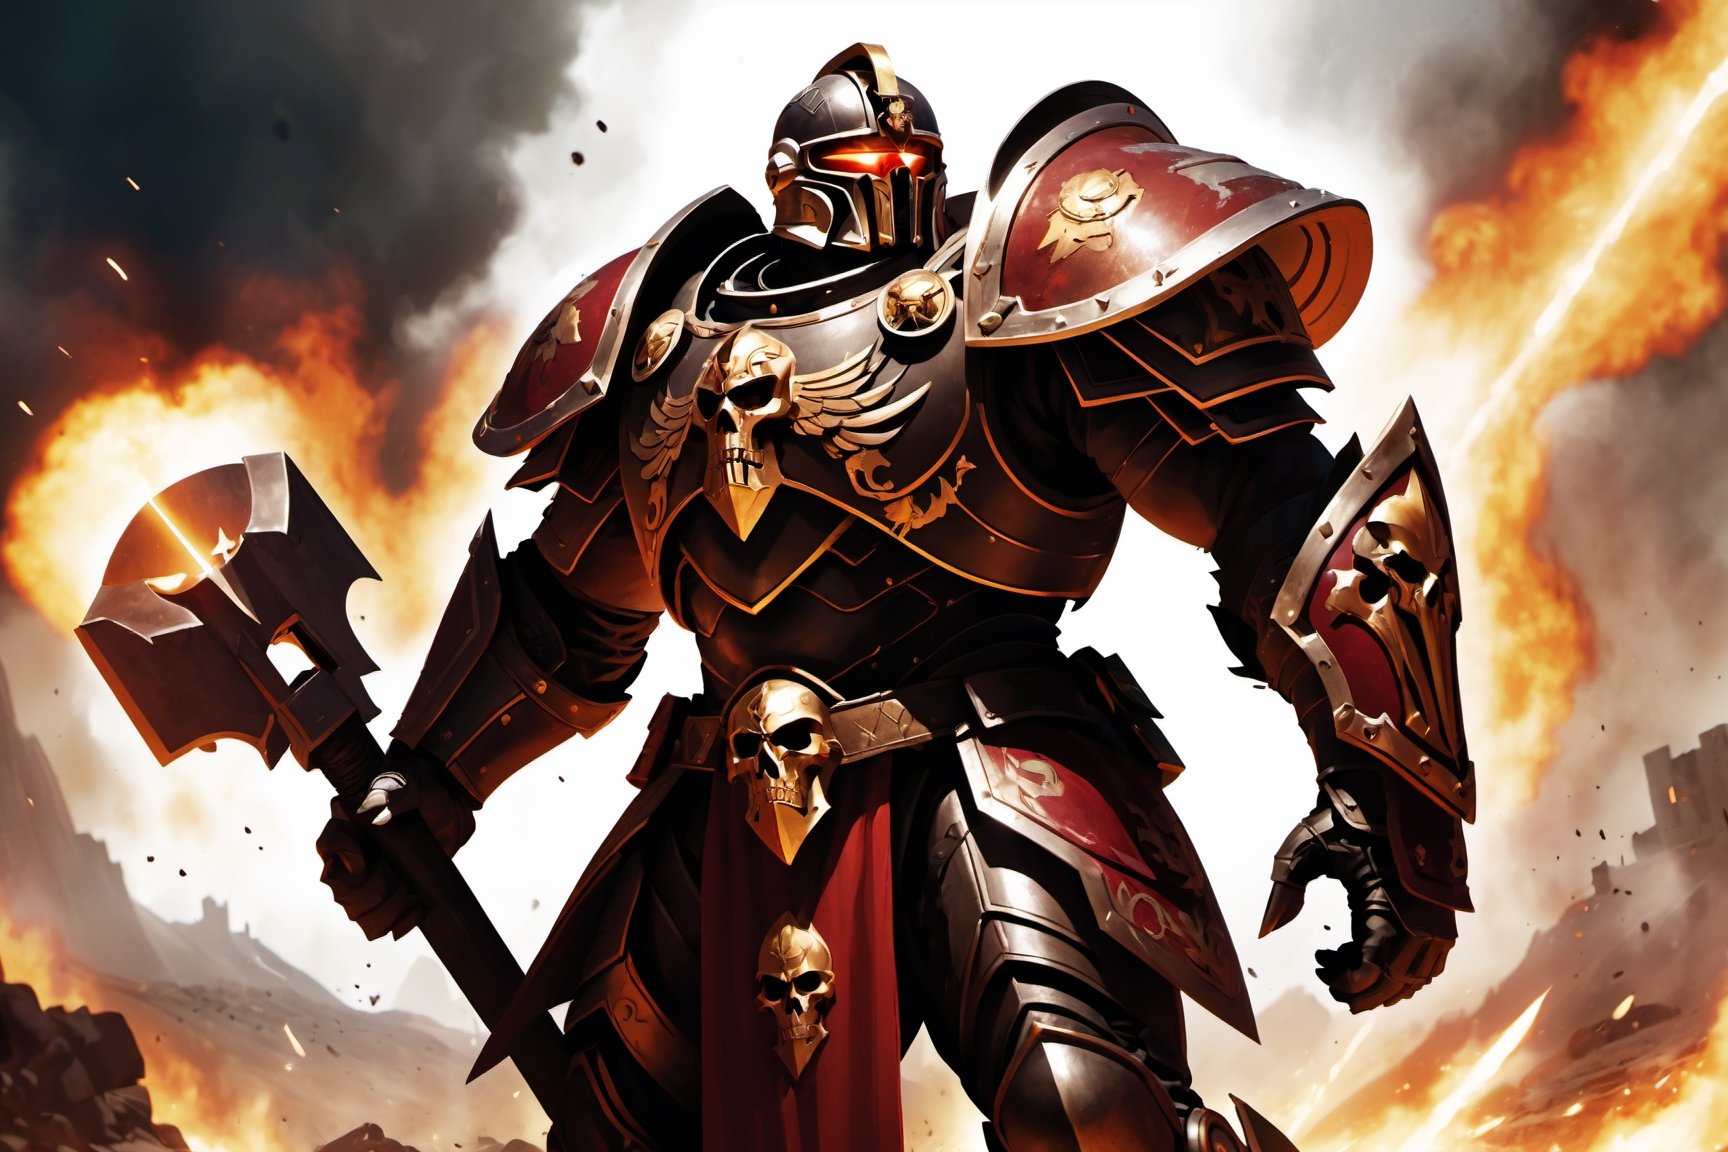 (8k HDR), (masterpiece, best quality),

Title: Ares, God of War in the Warhammer 40K Universe

Scene Description:
Ares, now a towering Space Marine Captain, clad in ornate power armor, stands on the smoldering battlefield of a war-torn planet. His armor is a masterwork of Imperial craftsmanship, deeply engraved with symbols of war and destruction, and painted in the blood-red colors of his chapter. His cape, tattered and scorched, flutters in the toxic winds.

Focal Point:
Ares wields a massive, chain-wrapped thunder hammer, glowing with arcane energies, raised high as he charges into a horde of alien enemies. His other hand clutches a bolt pistol, spewing fiery rounds into the melee. Around his waist, a belt adorned with skulls and relics from vanquished foes.

Background Elements:
The landscape around him is chaotic and devastated, with the remnants of a once-mighty city now reduced to rubble and flames. Exploding shells light up the dark sky, and drop pods descend in the background, bringing reinforcements or dreadnought allies.

Atmospheric Effects:
Smoke and dust fill the air, pierced by the harsh light of gunfire and explosions. In the distance, the twisted forms of enemy war machines loom, clashing against the Imperial forces.

Dynamic Action:
Ares roars a battle cry, his voice amplified by his helmet’s vox-grille, inspiring fear in his foes and fervor in his troops. Close by, Space Marines rally to his side, their armor echoing his design, forming an unstoppable tide of red and steel.

dark and vibrant, (micheal bay cinematic shots), depth of field, 2D